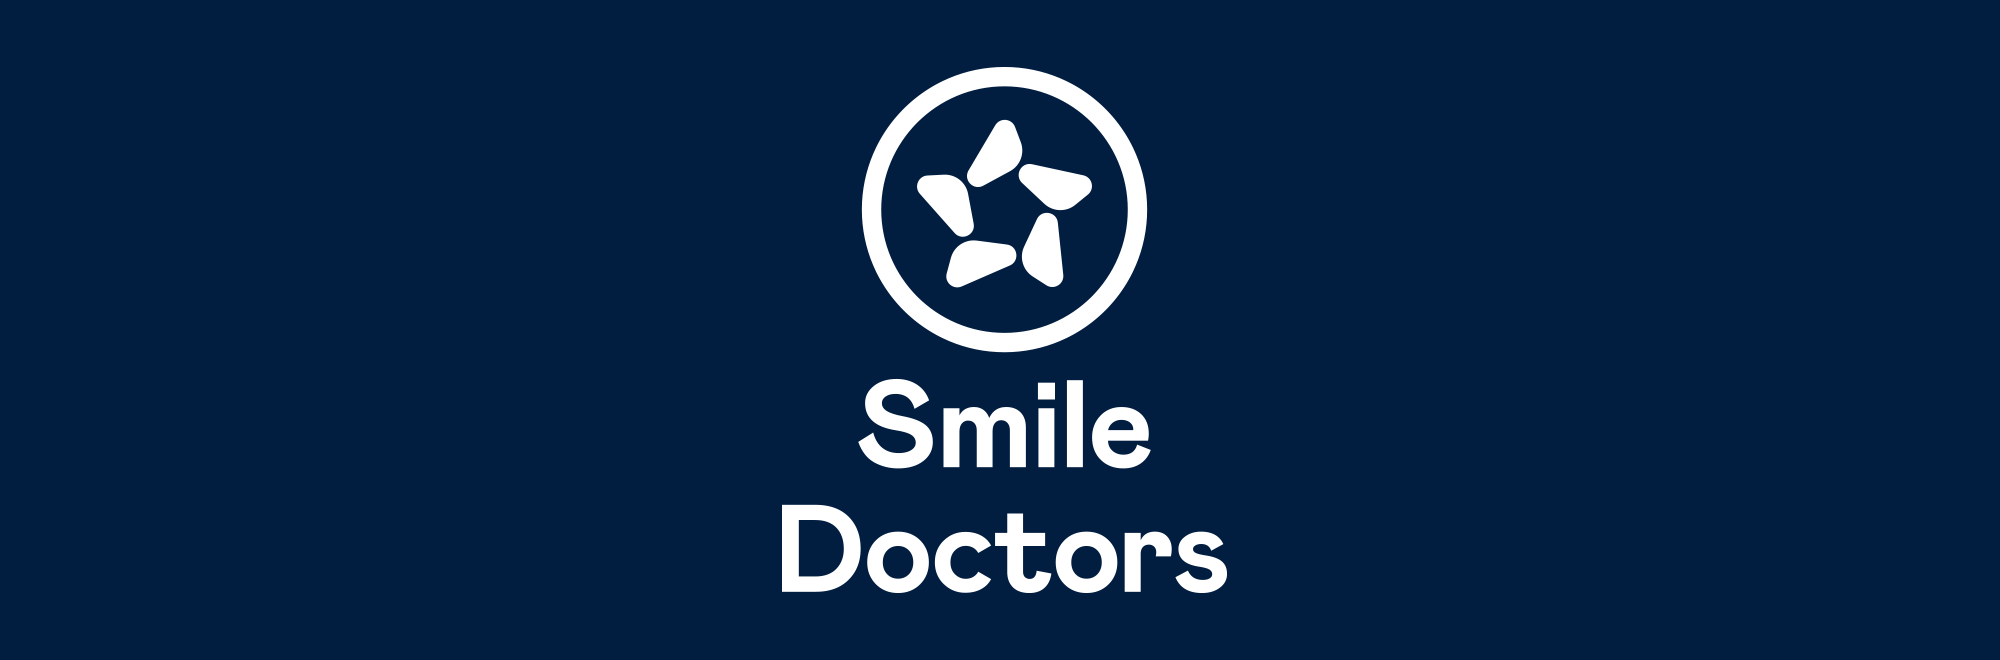 Smile Doctors Enters Arkansas and Utah, Continues 2022 Expansion